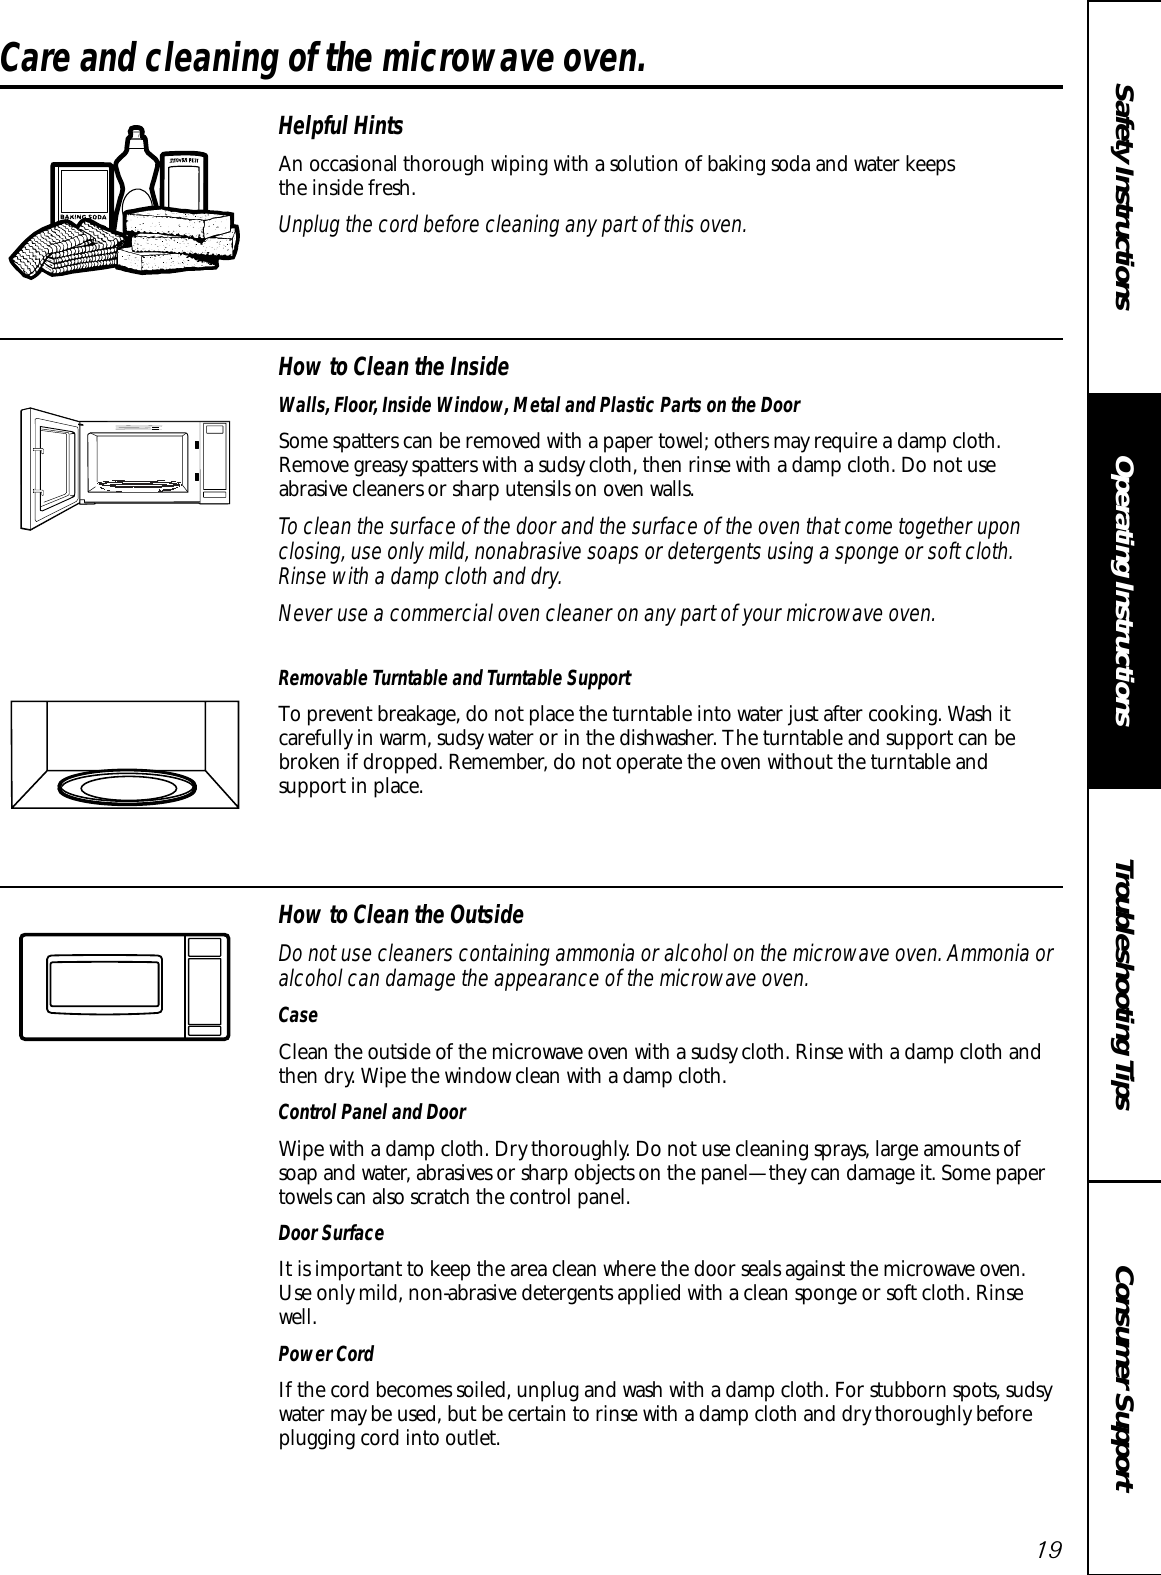 Consumer SupportTroubleshooting TipsOperating InstructionsSafety Instructions19Care and cleaning of the microwave oven. Helpful HintsAn occasional thorough wiping with a solution of baking soda and water keeps the inside fresh.Unplug the cord before cleaning any part of this oven.How to Clean the InsideWalls, Floor, Inside Window, Metal and Plastic Parts on the DoorSome spatters can be removed with a paper towel; others may require a damp cloth.Remove greasy spatters with a sudsy cloth, then rinse with a damp cloth. Do not use abrasive cleaners or sharp utensils on oven walls. To clean the surface of the door and the surface of the oven that come together uponclosing, use only mild, nonabrasive soaps or detergents using a sponge or soft cloth.Rinse with a damp cloth and dry.Never use a commercial oven cleaner on any part of your microwave oven.Removable Turntable and Turntable Support To prevent breakage, do not place the turntable into water just after cooking. Wash itcarefully in warm, sudsy water or in the dishwasher. The turntable and support can bebroken if dropped. Remember, do not operate the oven without the turntable and support in place.How to Clean the OutsideDo not use cleaners containing ammonia or alcohol on the microwave oven. Ammonia oralcohol can damage the appearance of the microwave oven.CaseClean the outside of the microwave oven with a sudsy cloth. Rinse with a damp cloth andthen dry. Wipe the window clean with a damp cloth. Control Panel and DoorWipe with a damp cloth. Dry thoroughly. Do not use cleaning sprays, large amounts ofsoap and water, abrasives or sharp objects on the panel—they can damage it. Some papertowels can also scratch the control panel.Door SurfaceIt is important to keep the area clean where the door seals against the microwave oven.Use only mild, non-abrasive detergents applied with a clean sponge or soft cloth. Rinsewell.Power CordIf the cord becomes soiled, unplug and wash with a damp cloth. For stubborn spots, sudsywater may be used, but be certain to rinse with a damp cloth and dry thoroughly beforeplugging cord into outlet.